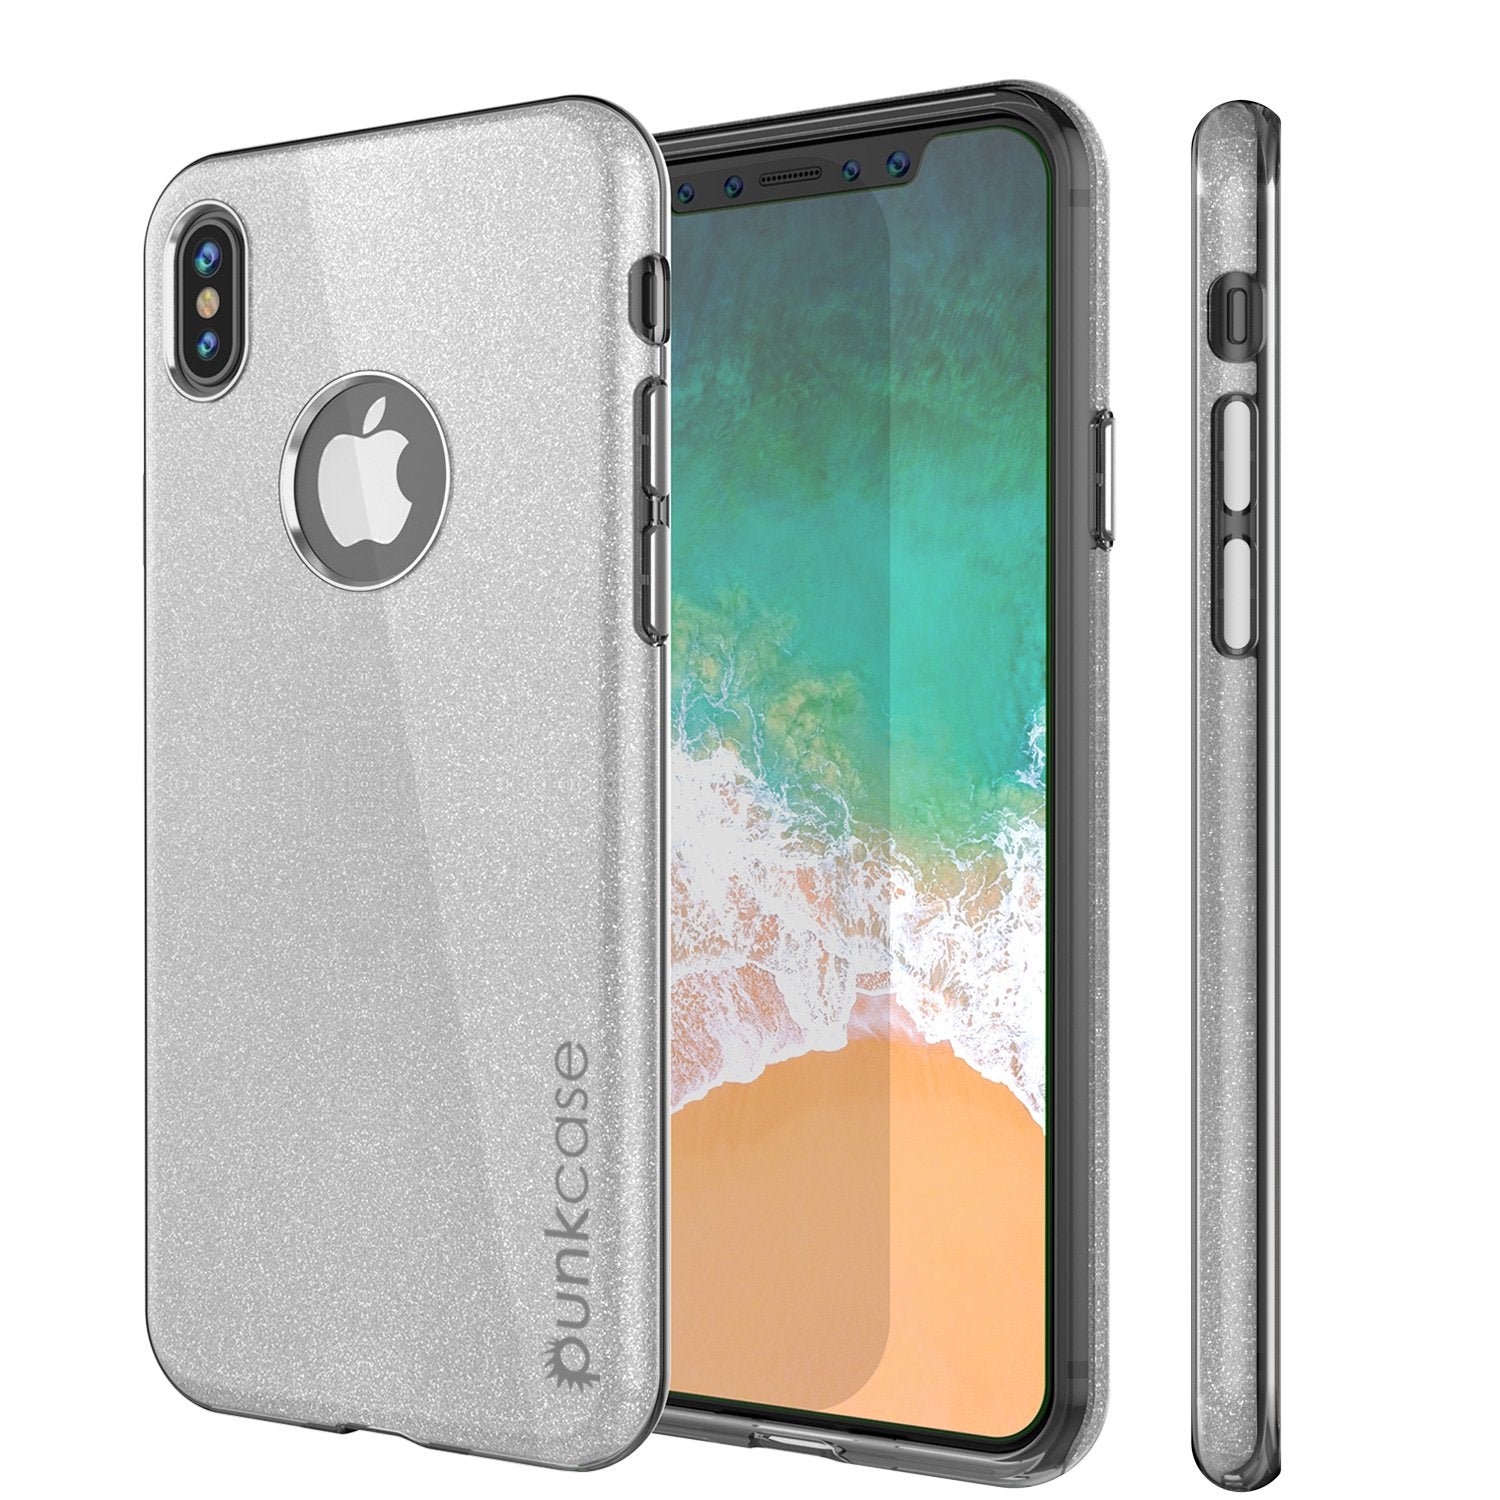 iPhone X Case, Punkcase Galactic 2.0 Series Ultra Slim w/ Tempered Glass Screen Protector | [Silver] - PunkCase NZ